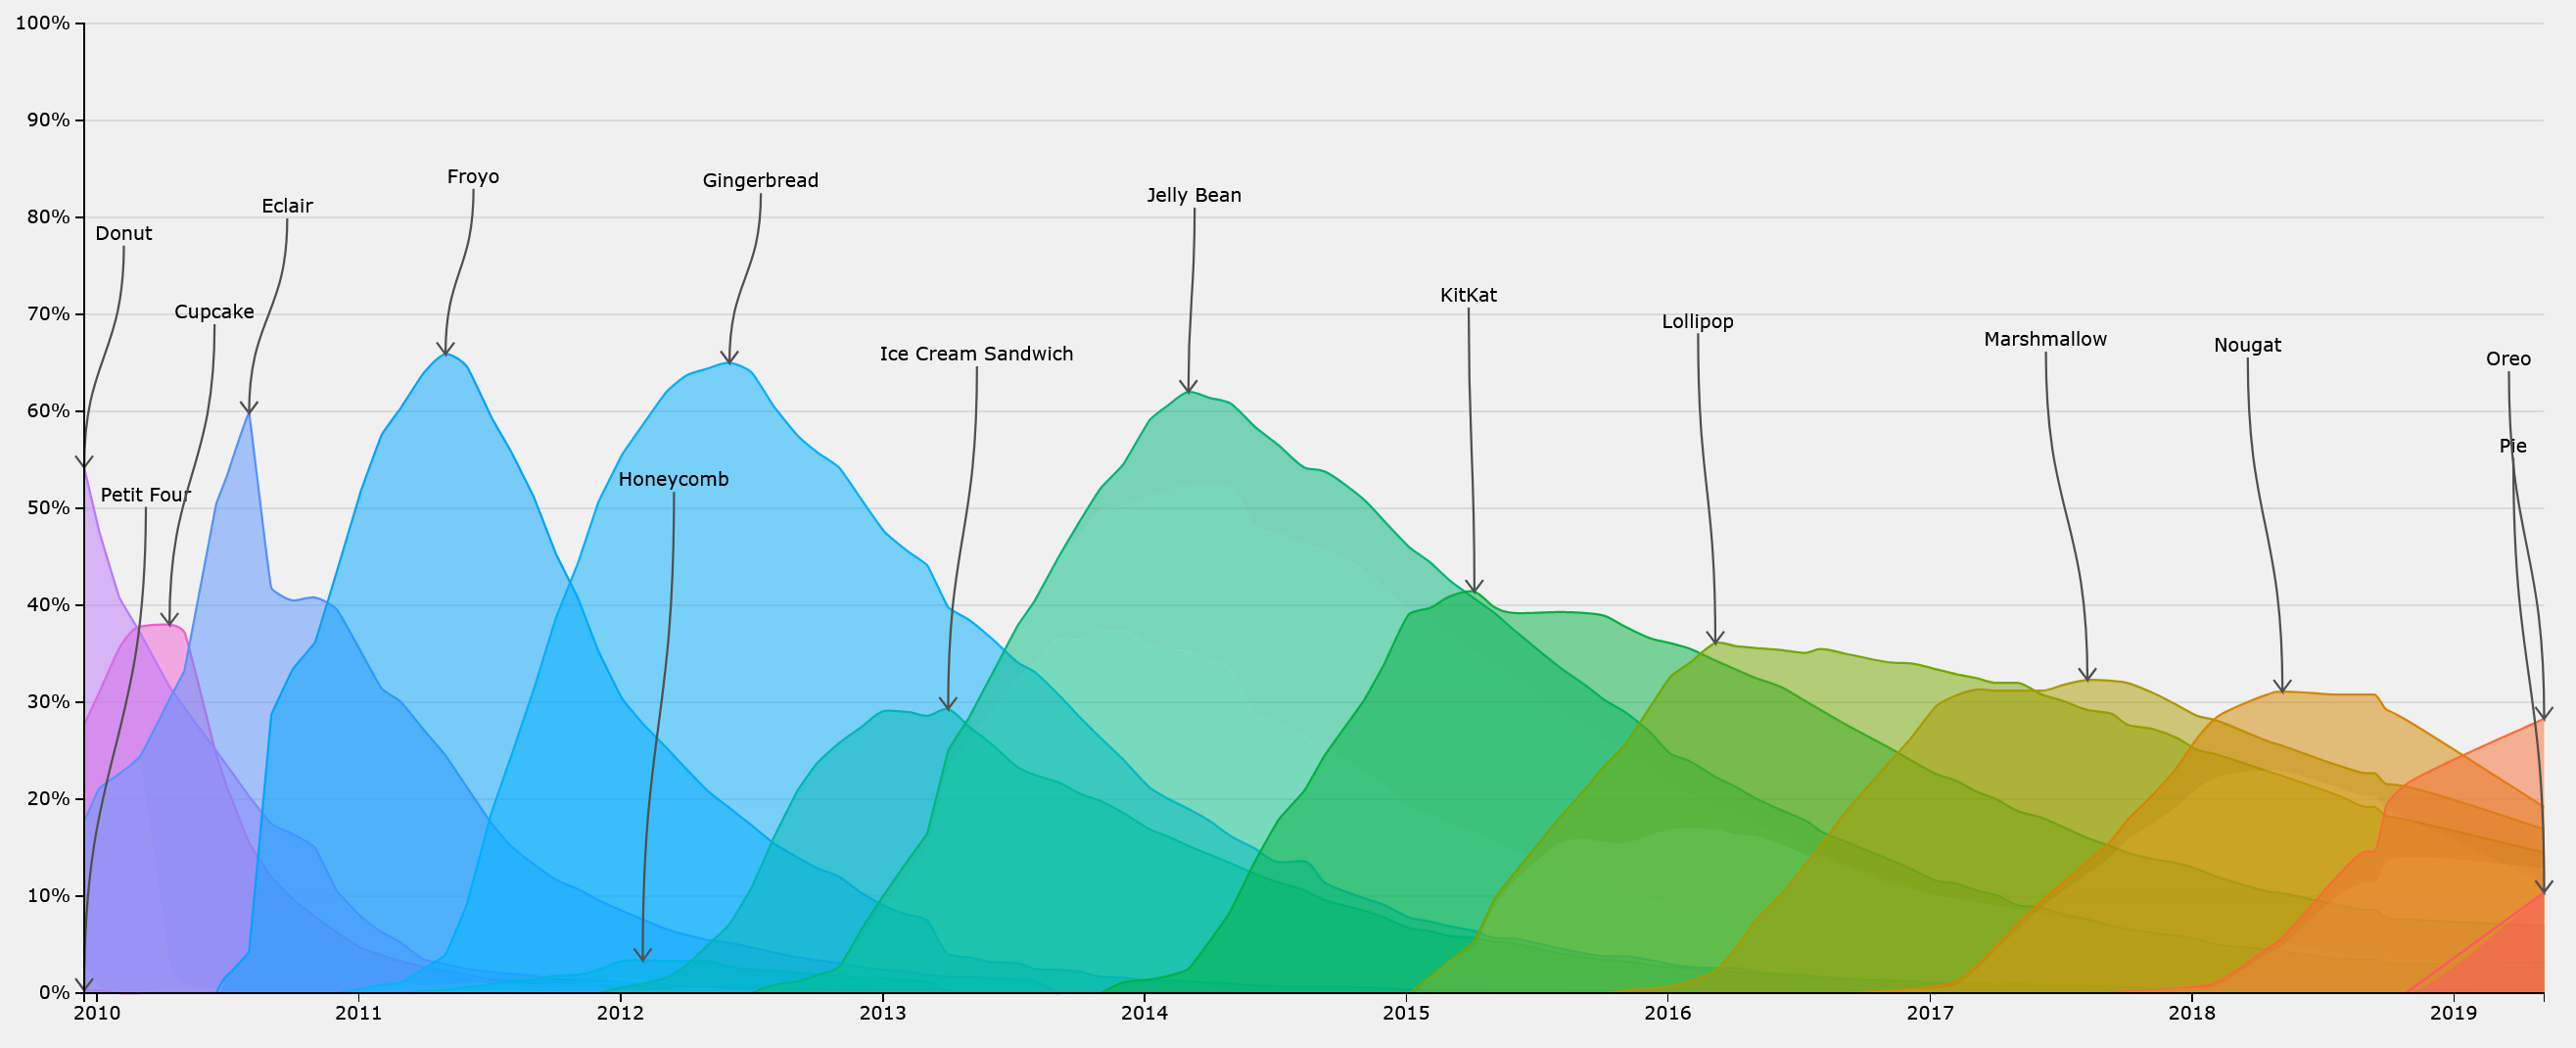 Layered graph showing the adoption and decline of major Android releases